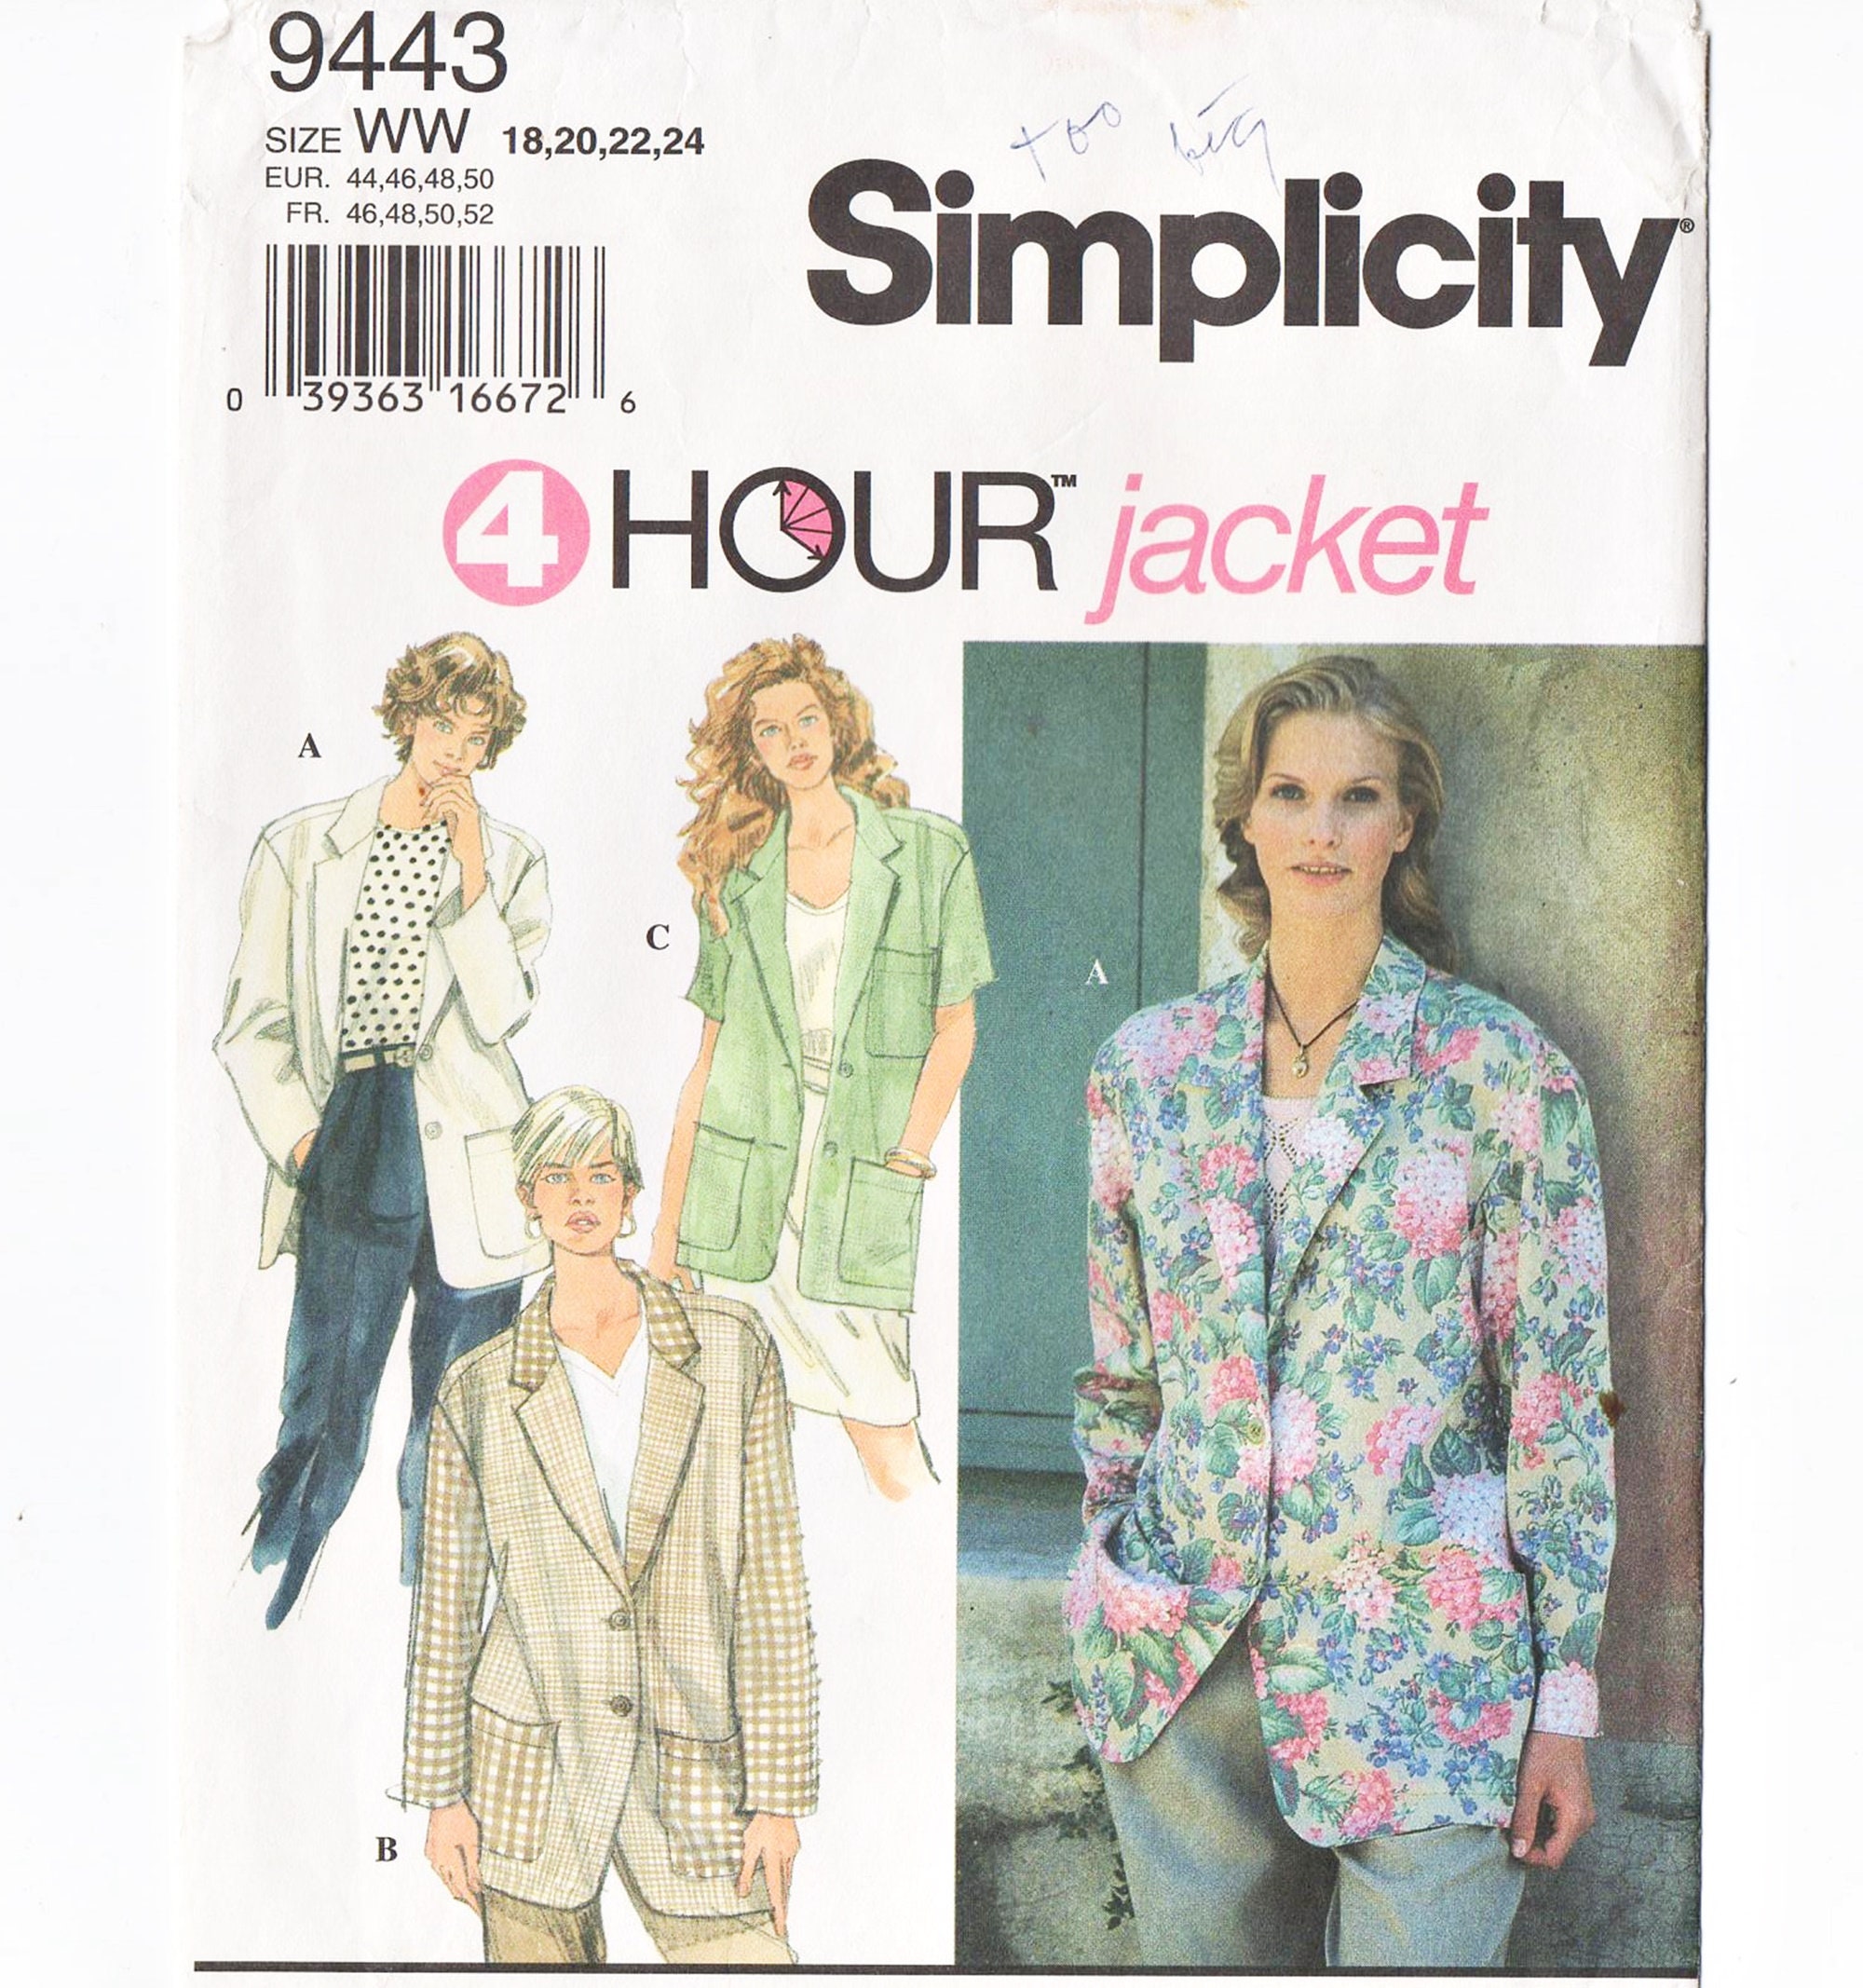 20 Blazer Oversized Loose Fitting Simplicity 9443 Misses 4 Hour Jacket 90s Vintage Sewing Pattern Size 18